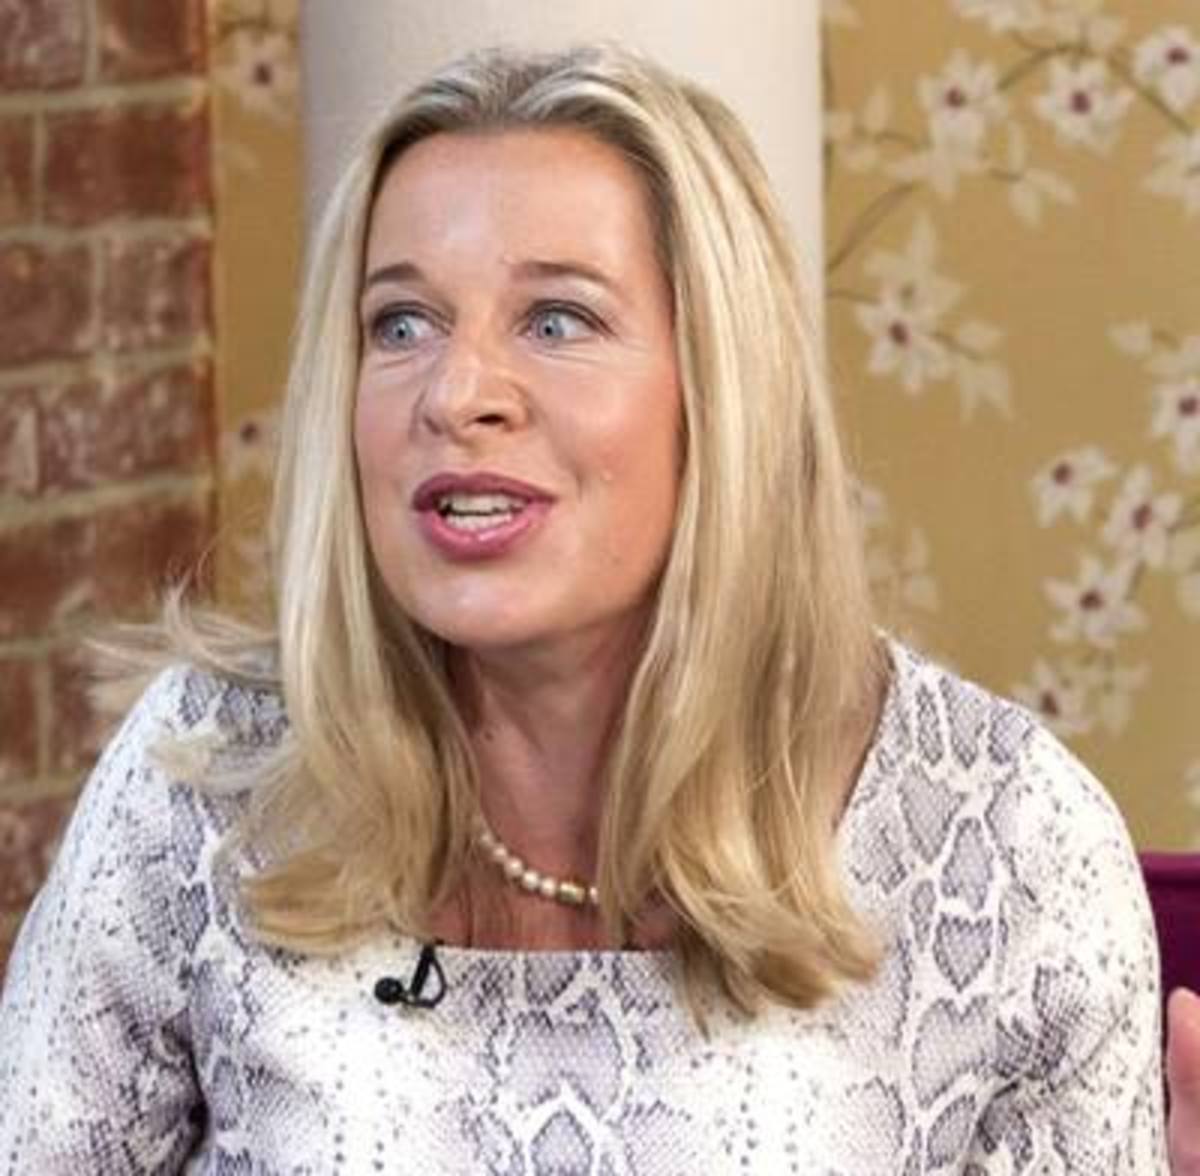 katie-hopkins-banned-and-banished-from-twitter